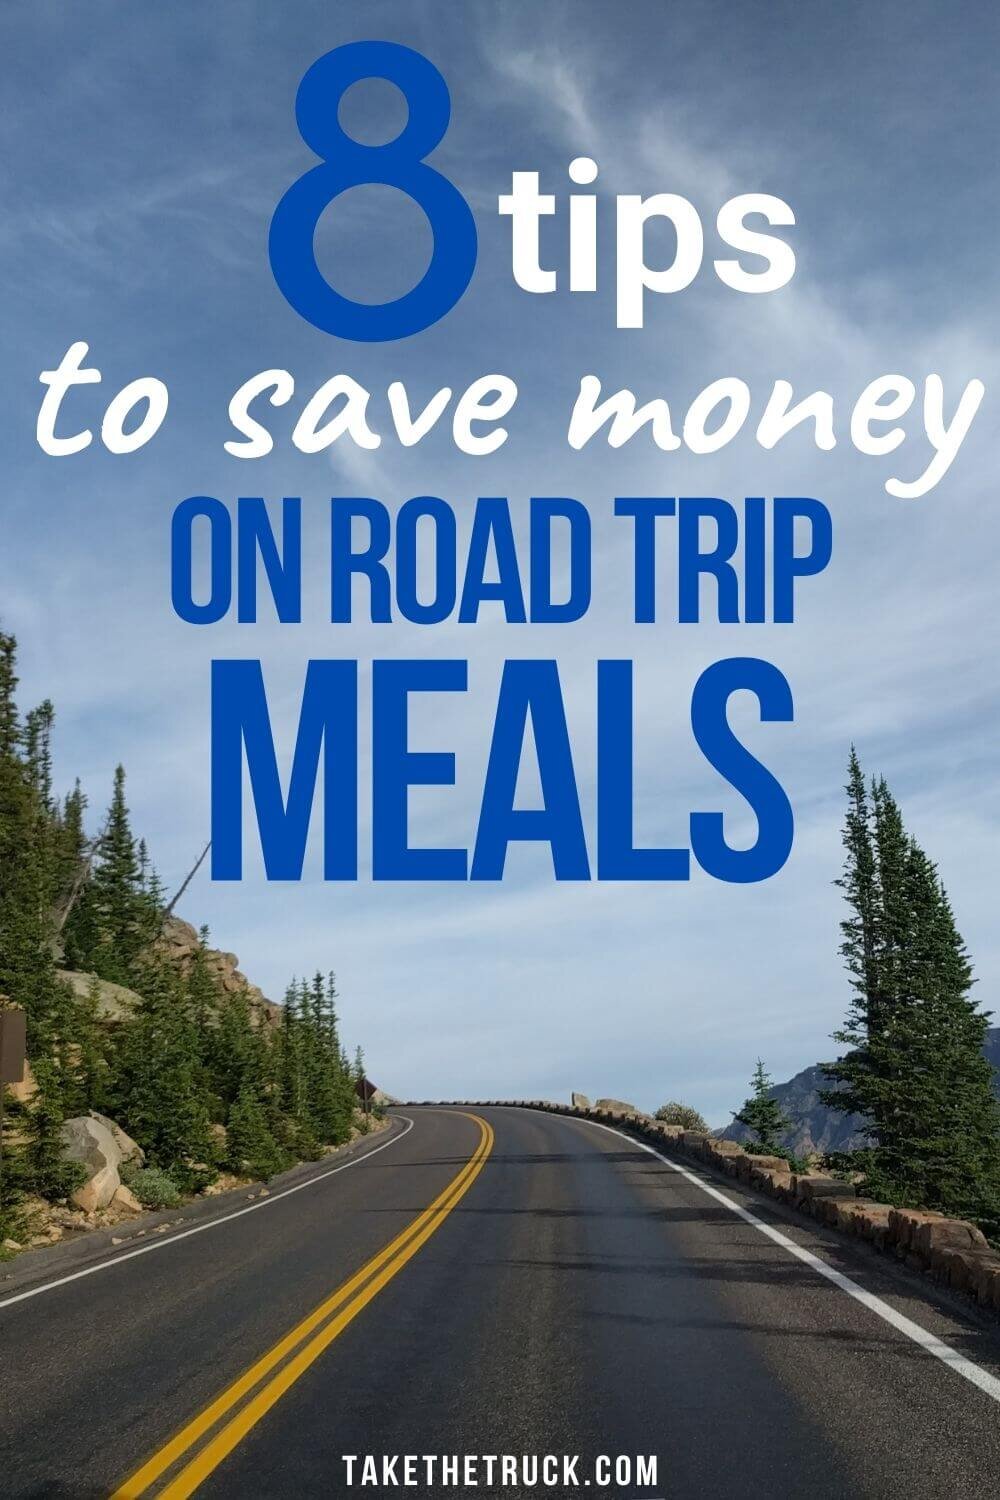 Learn how to save money on food on a road trip with these 8 easy road trip food and meal tips. Budget road trip meals and food can be healthy, good, and help you save money.